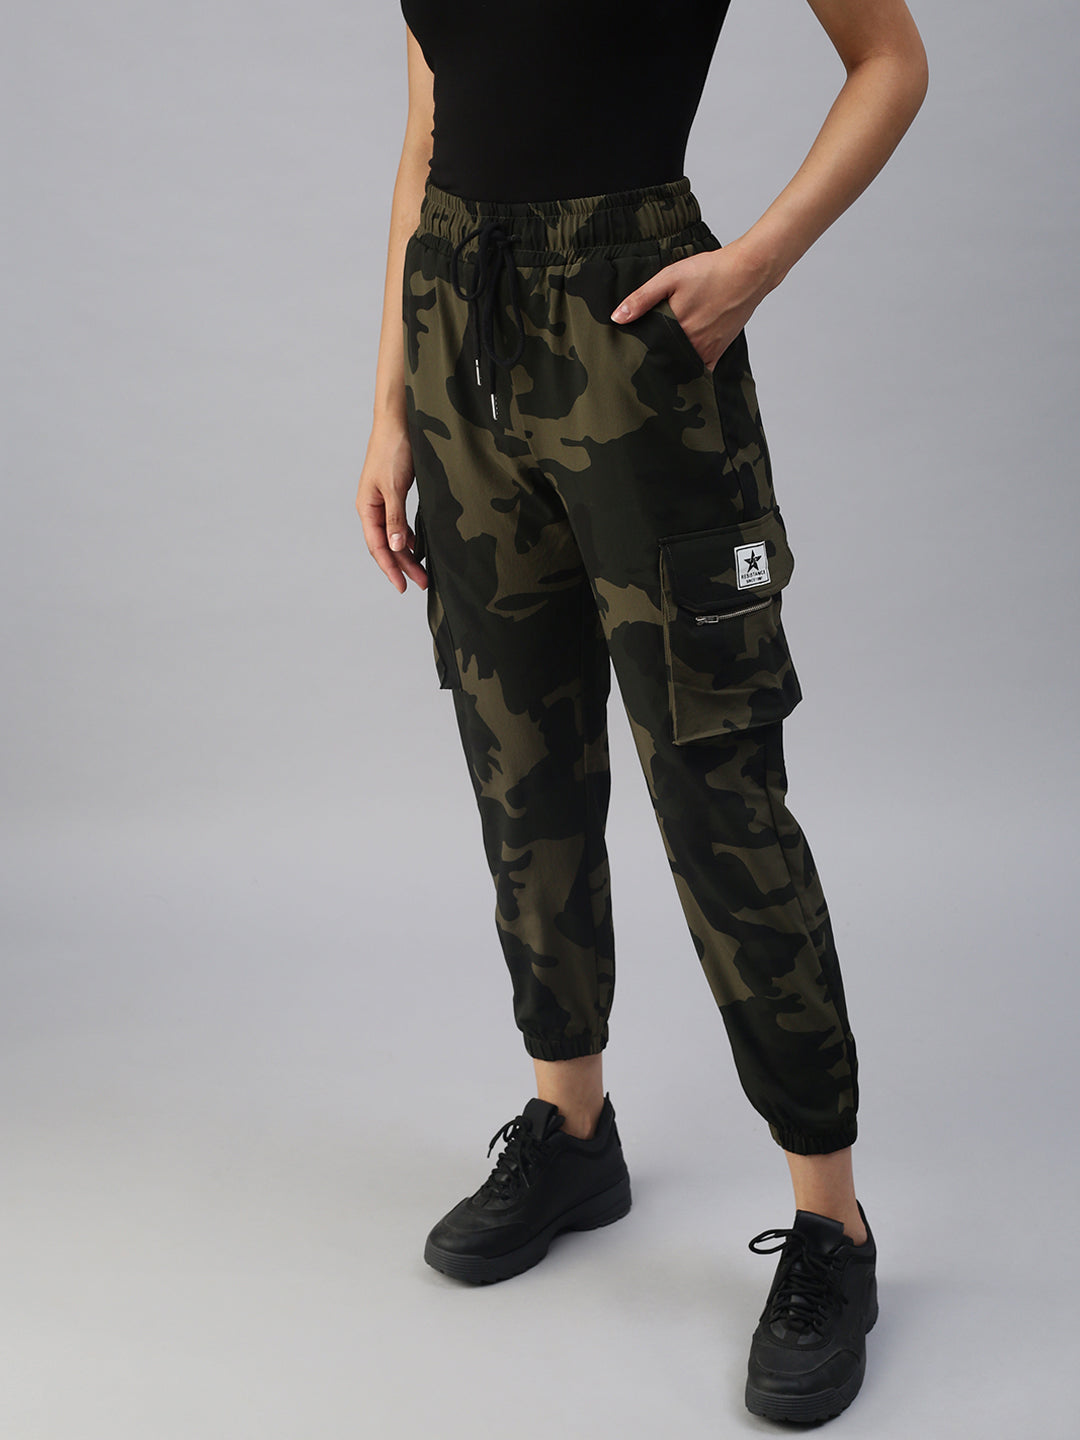 Women's Green Printed Joggers Track Pant